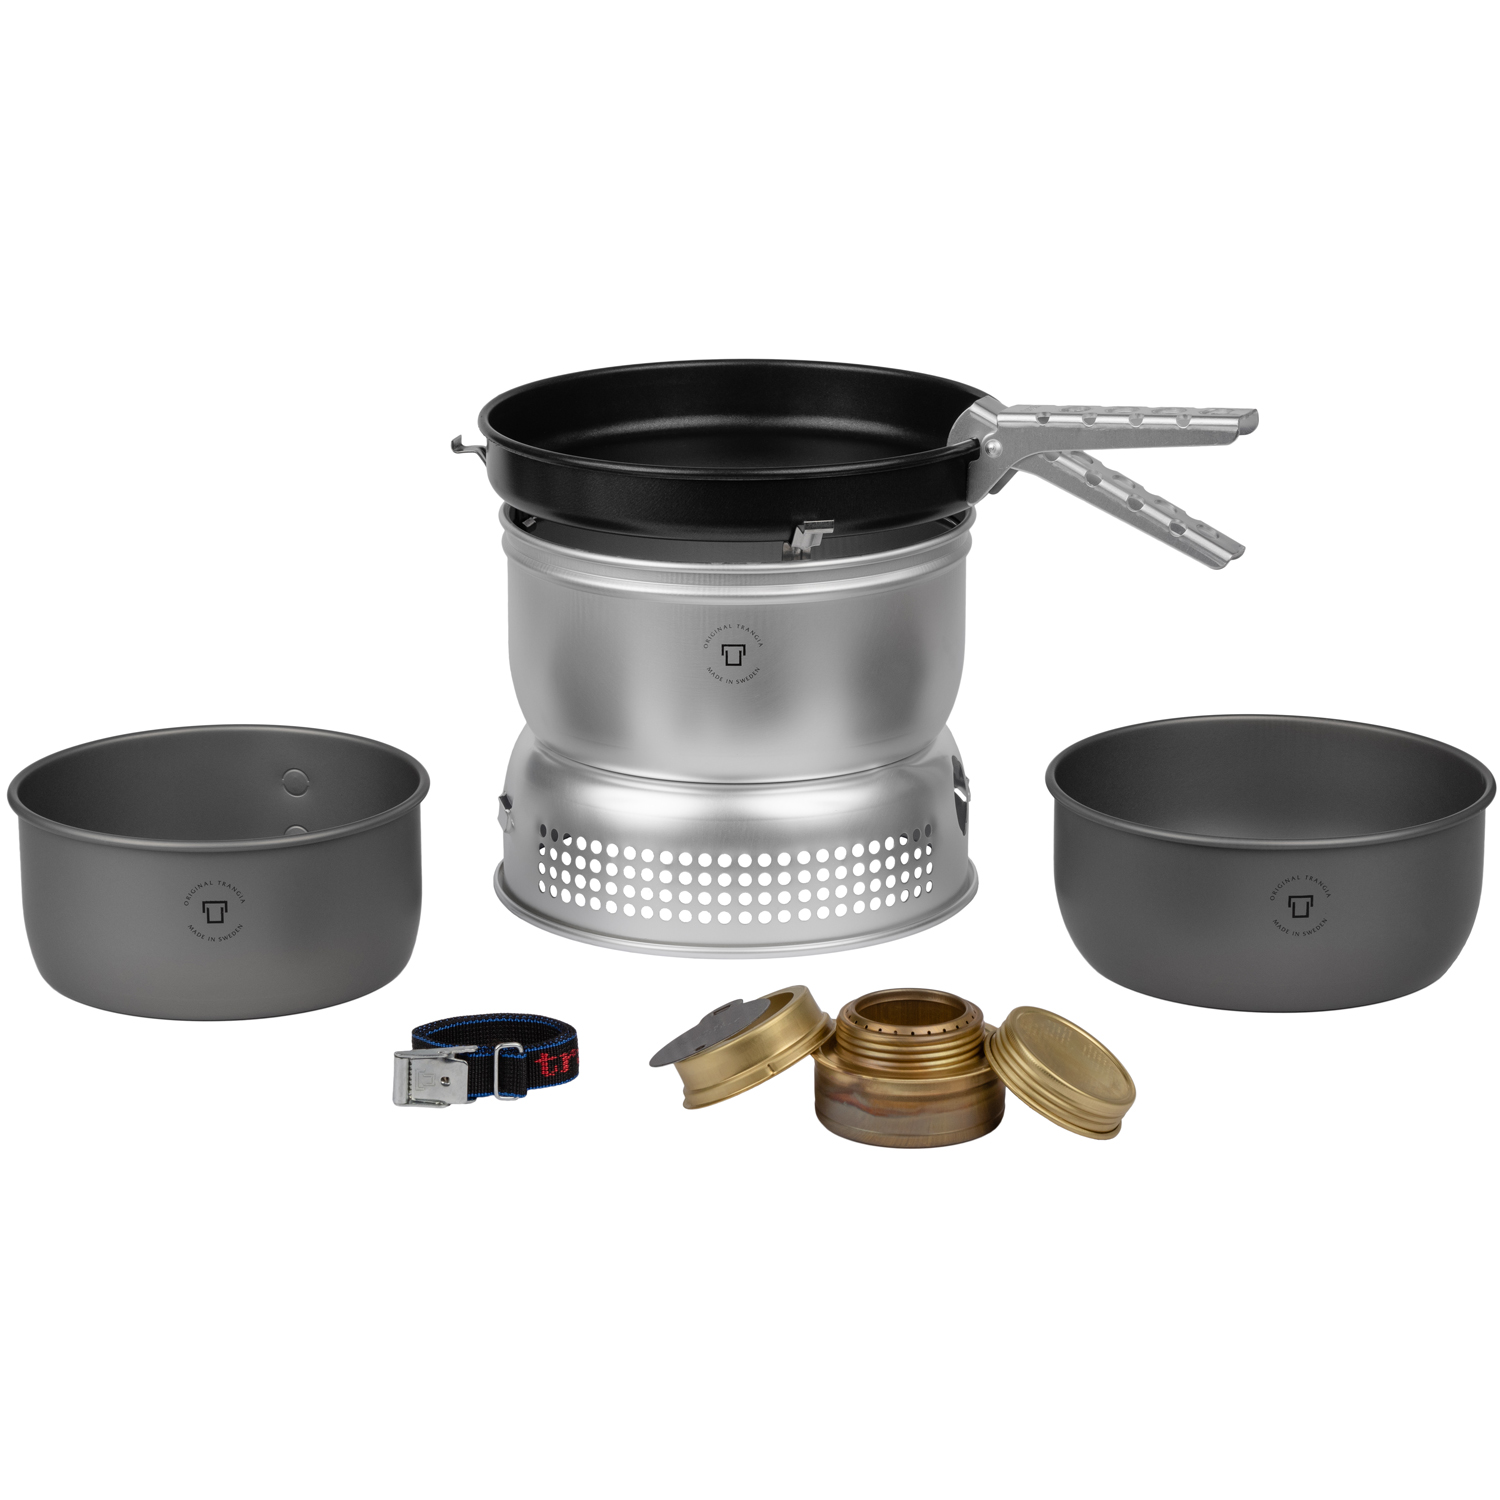 Picture of Trangia Storm Cooker 25-9 UL/HA - Stove System with Non-Stick Frypan